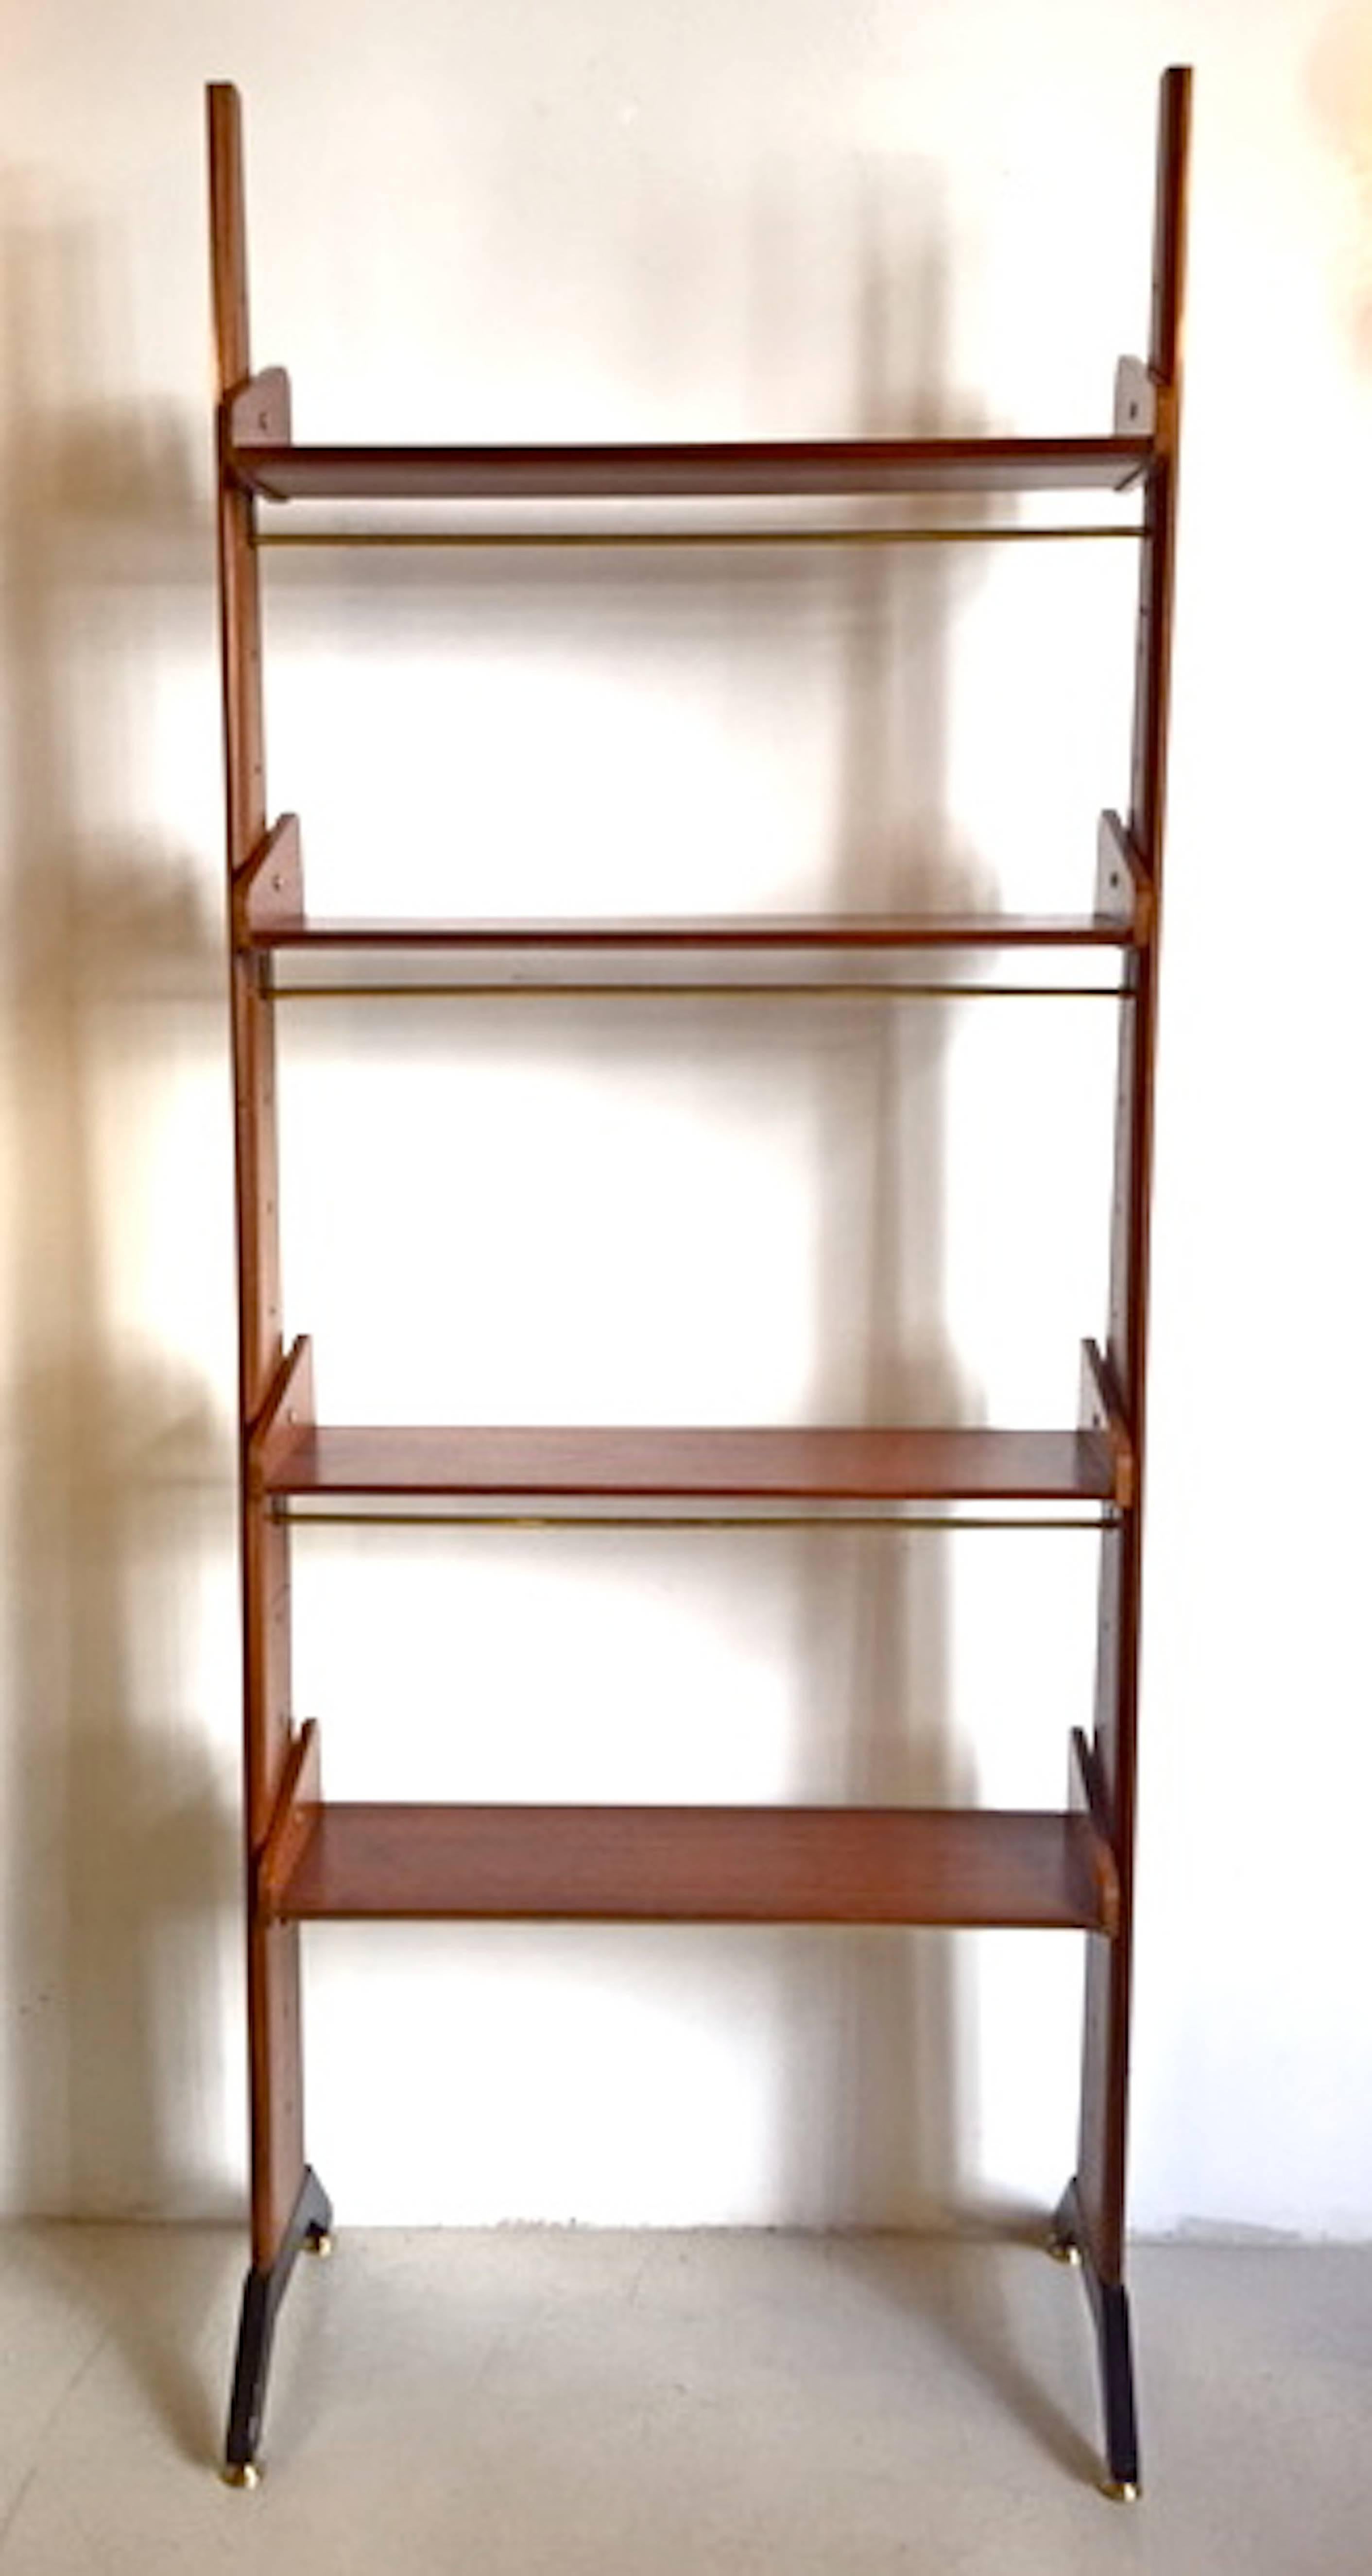 An Italian teak bookcase. Four shelves, patinated metal and brass base.
Excellent condition.